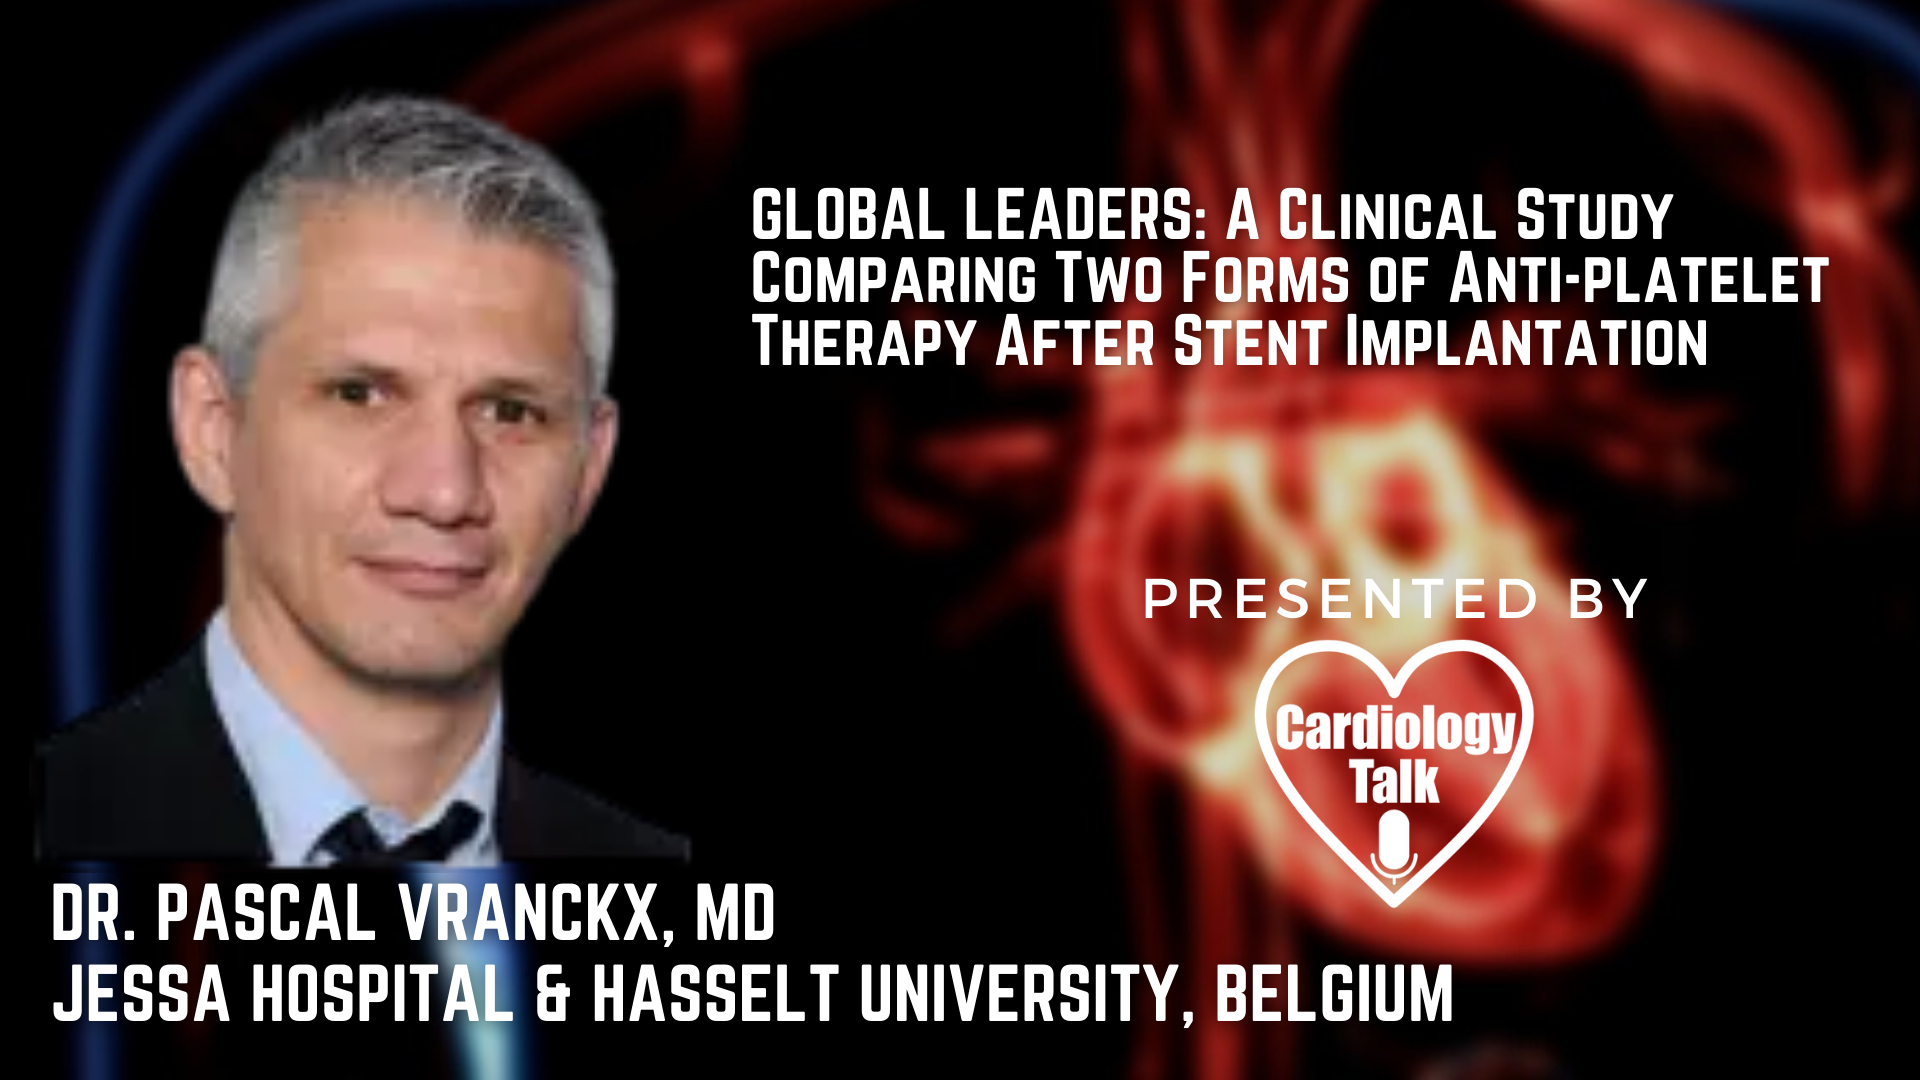 Pascal Vranckx MD- GLOBAL LEADERS: A Clinical Study Comparing Two Forms of Anti-platelet Therapy After Stent Implantation